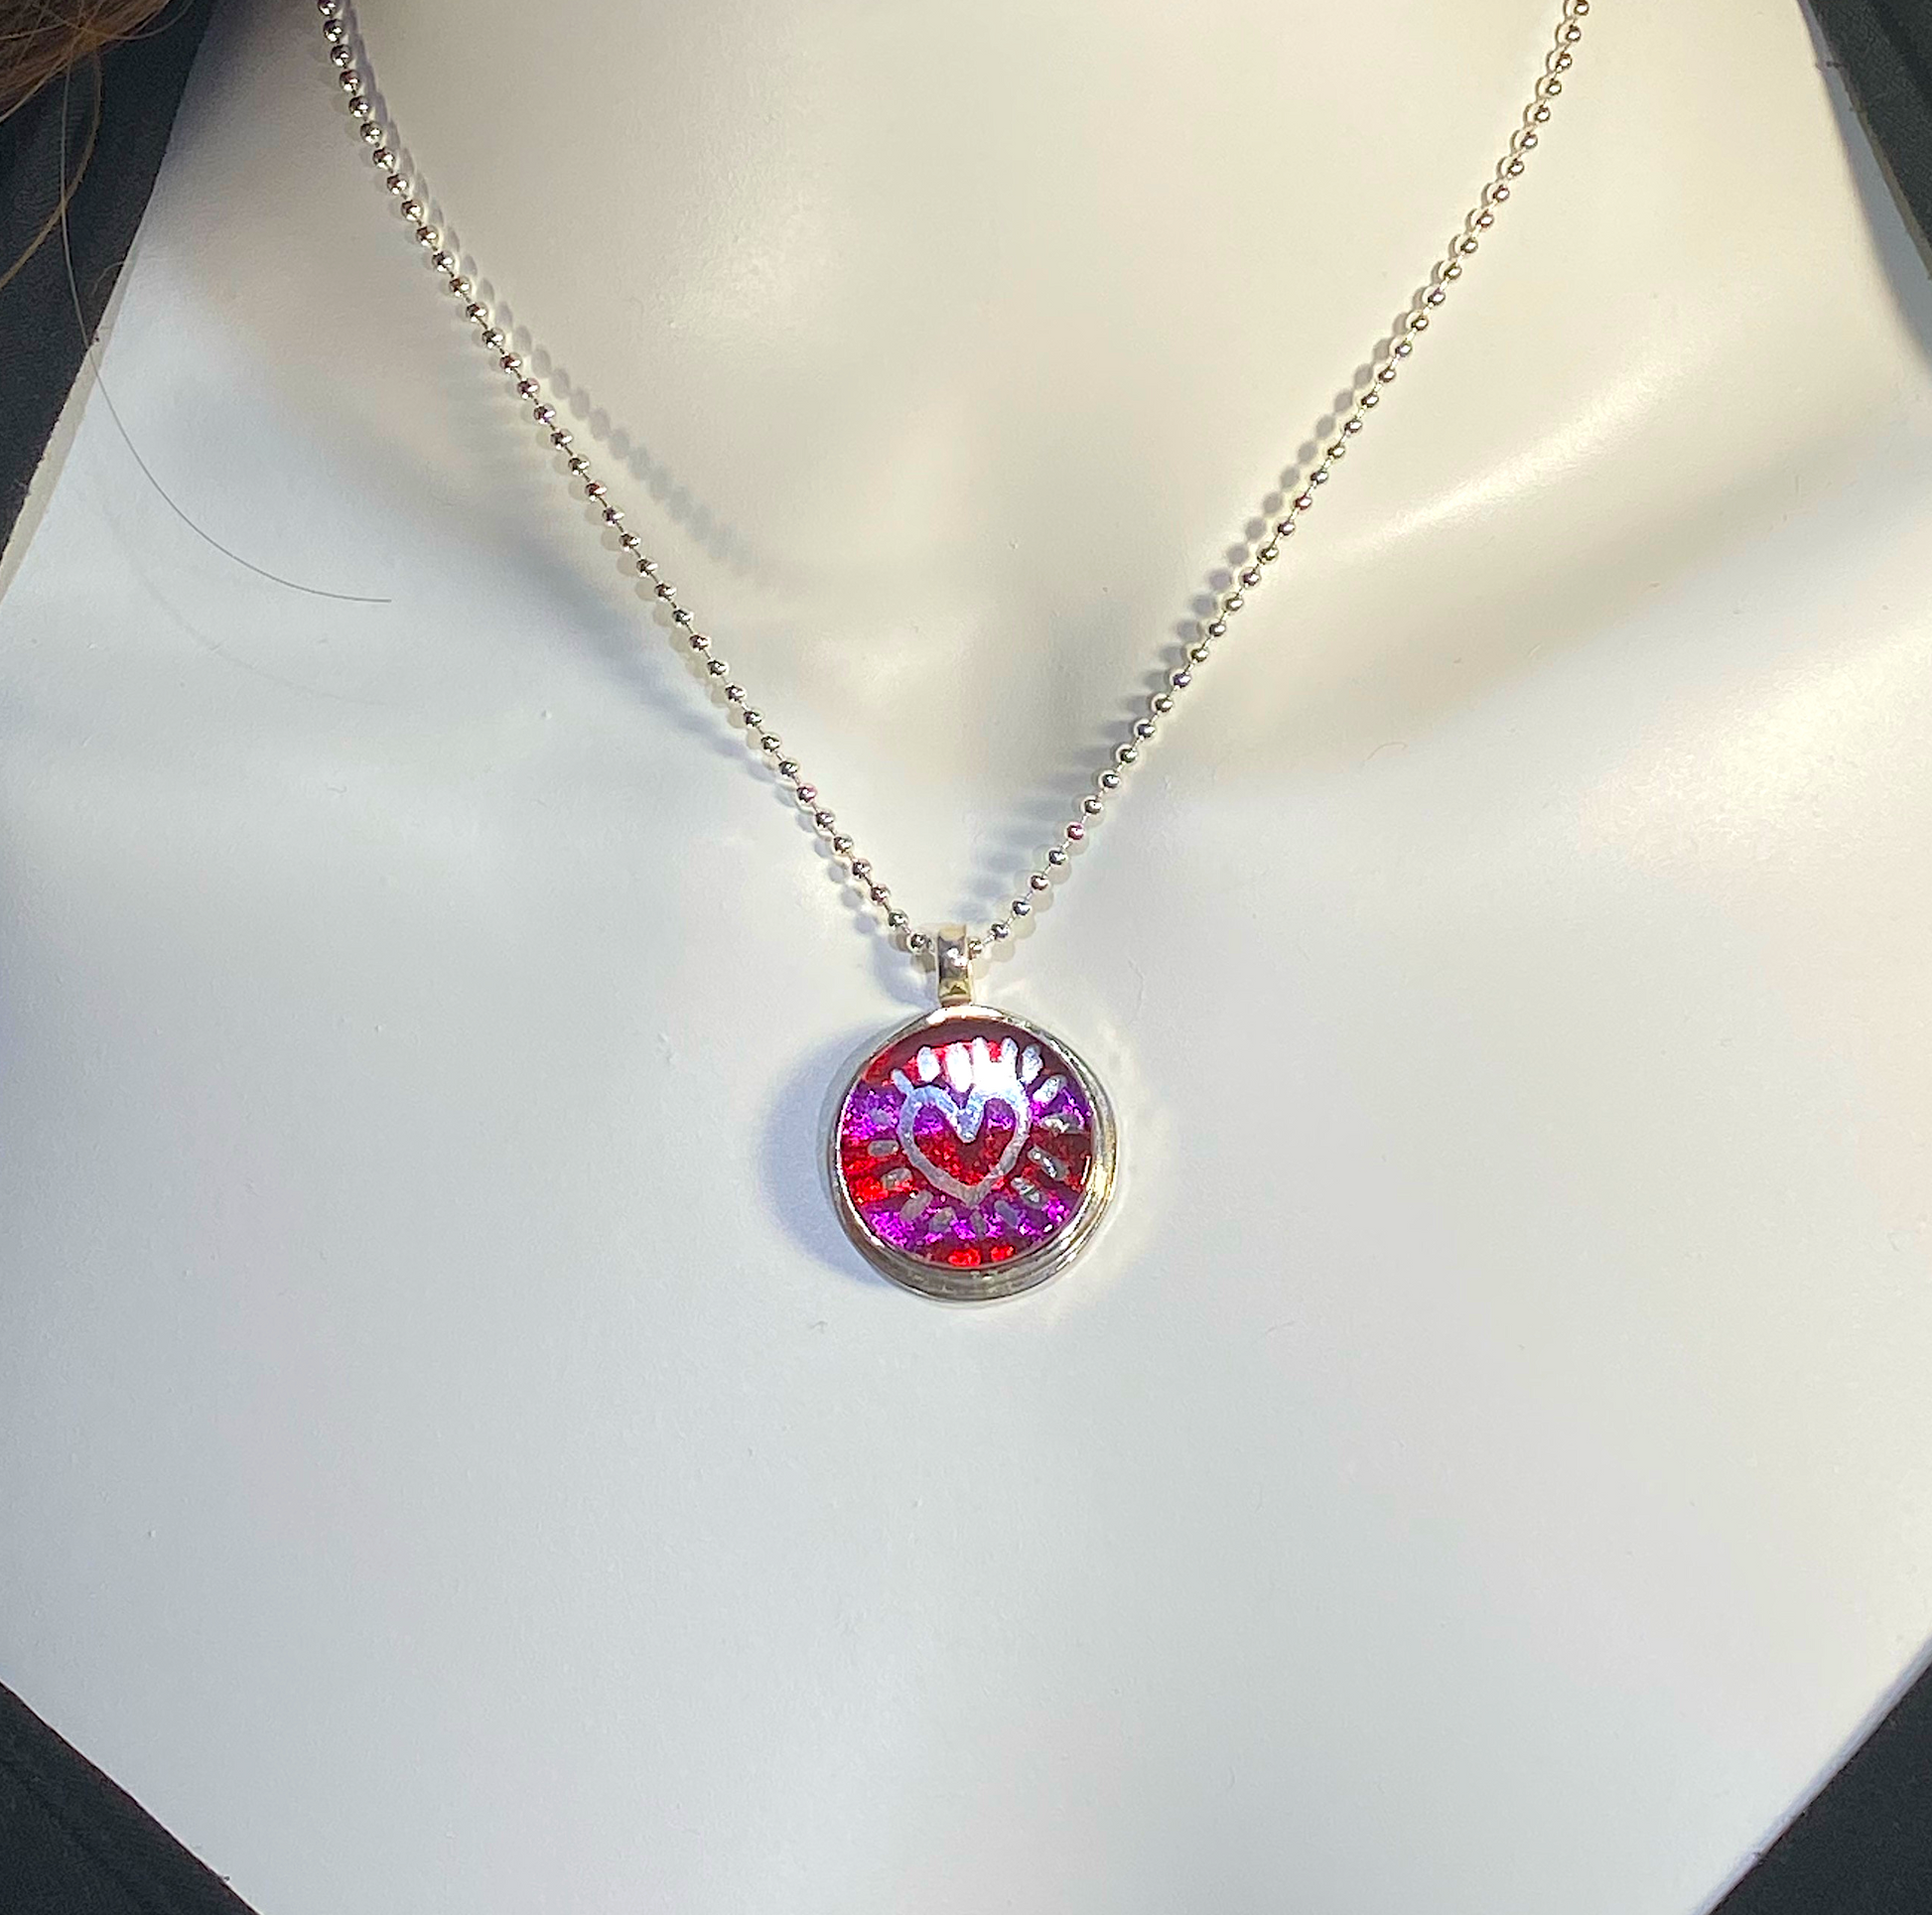 Silver luster painted striped circle necklace in pink and purple, fused glass, glass jewelry, glass and silver jewelry, handmade, handcrafted, American Craft, hand fabricated jewelry, hand fabricated jewellery, Athen, Georgia, colorful jewelry, sparkle, bullseye glass, dichroic glass, art jewelry 